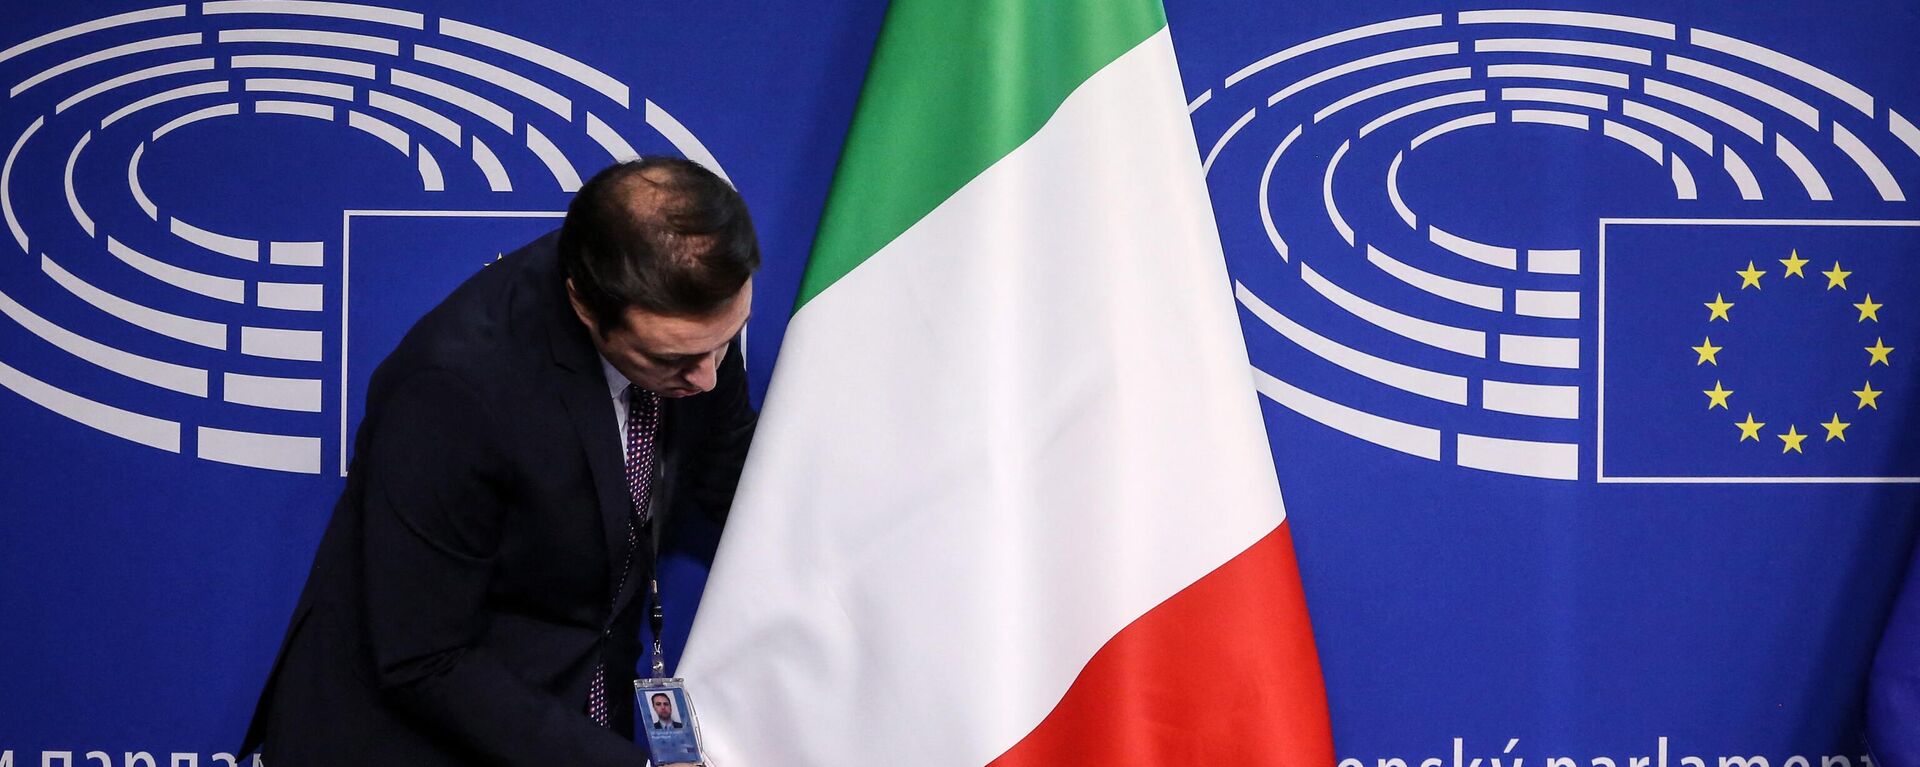 An European Parliament worker sets the Italian flag ahead of the visit of the newly appointed Italian Prime Minister (not pictured) at the European Parliament headquarters in Brussels, Belgium, on November 3, 2022.  - Sputnik International, 1920, 04.12.2022